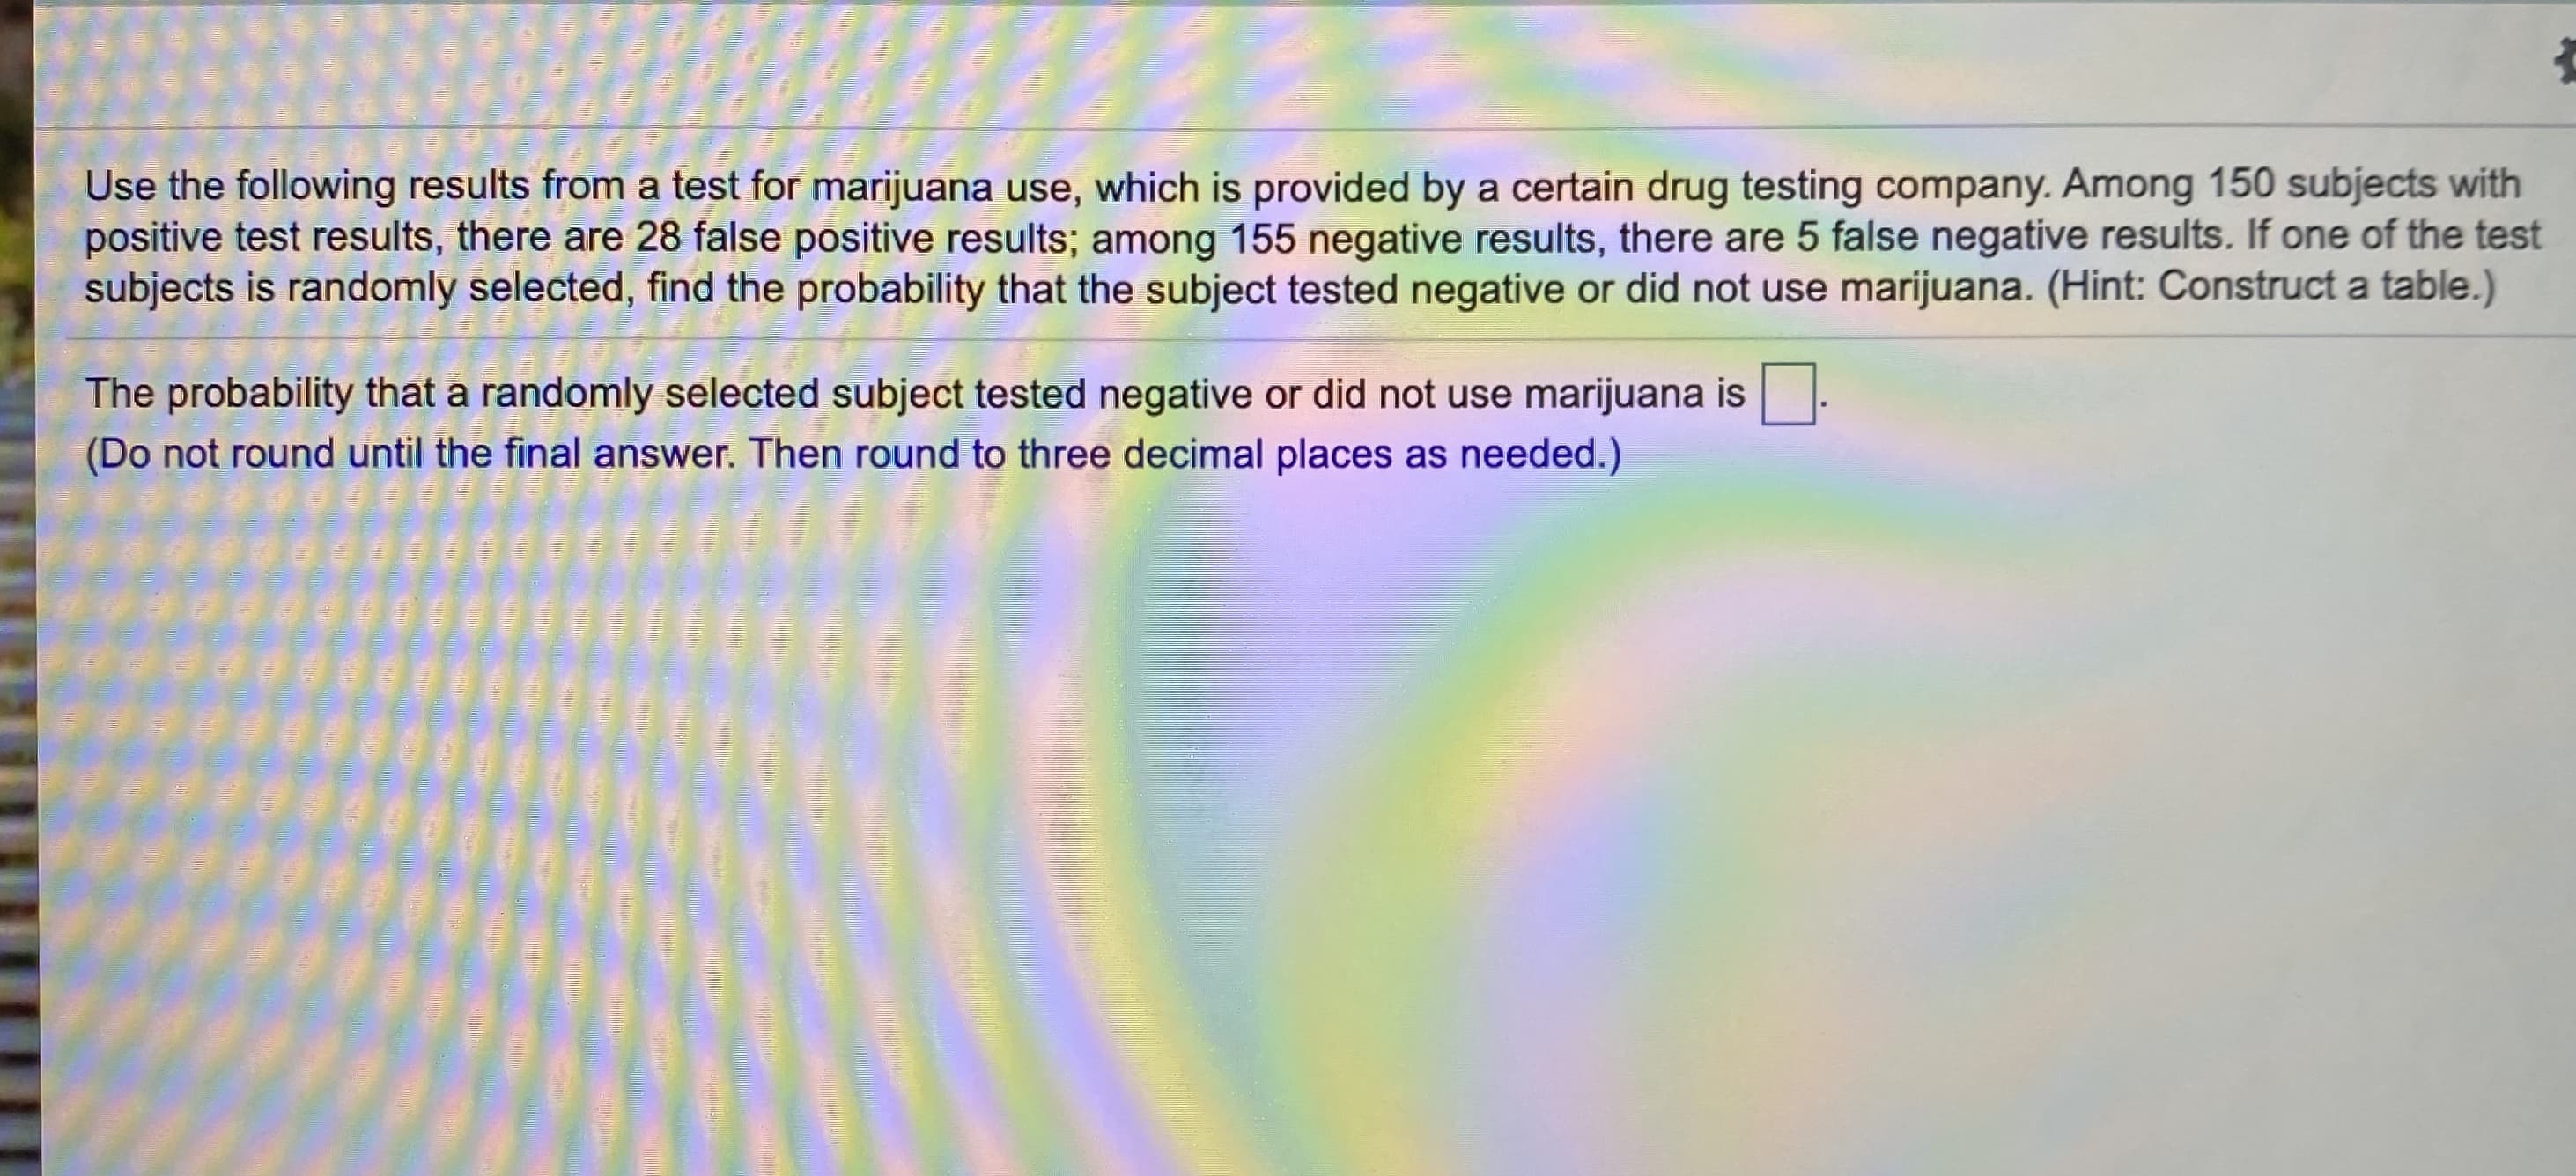 Use the following results from a test for marijuana use, which is provided by a certain drug testing company. Among 150 subjects with
positive test results, there are 28 false positive results; among 155 negative results, there are 5 false negative results. If one of the test
subjects is randomly selected, find the probability that the subject tested negative or did not use marijuana. (Hint: Construct a table.)
The probability that a randomly selected subject tested negative or did not use marijuana is
(Do not round until the final answer. Then round to three decimal places as needed.)
